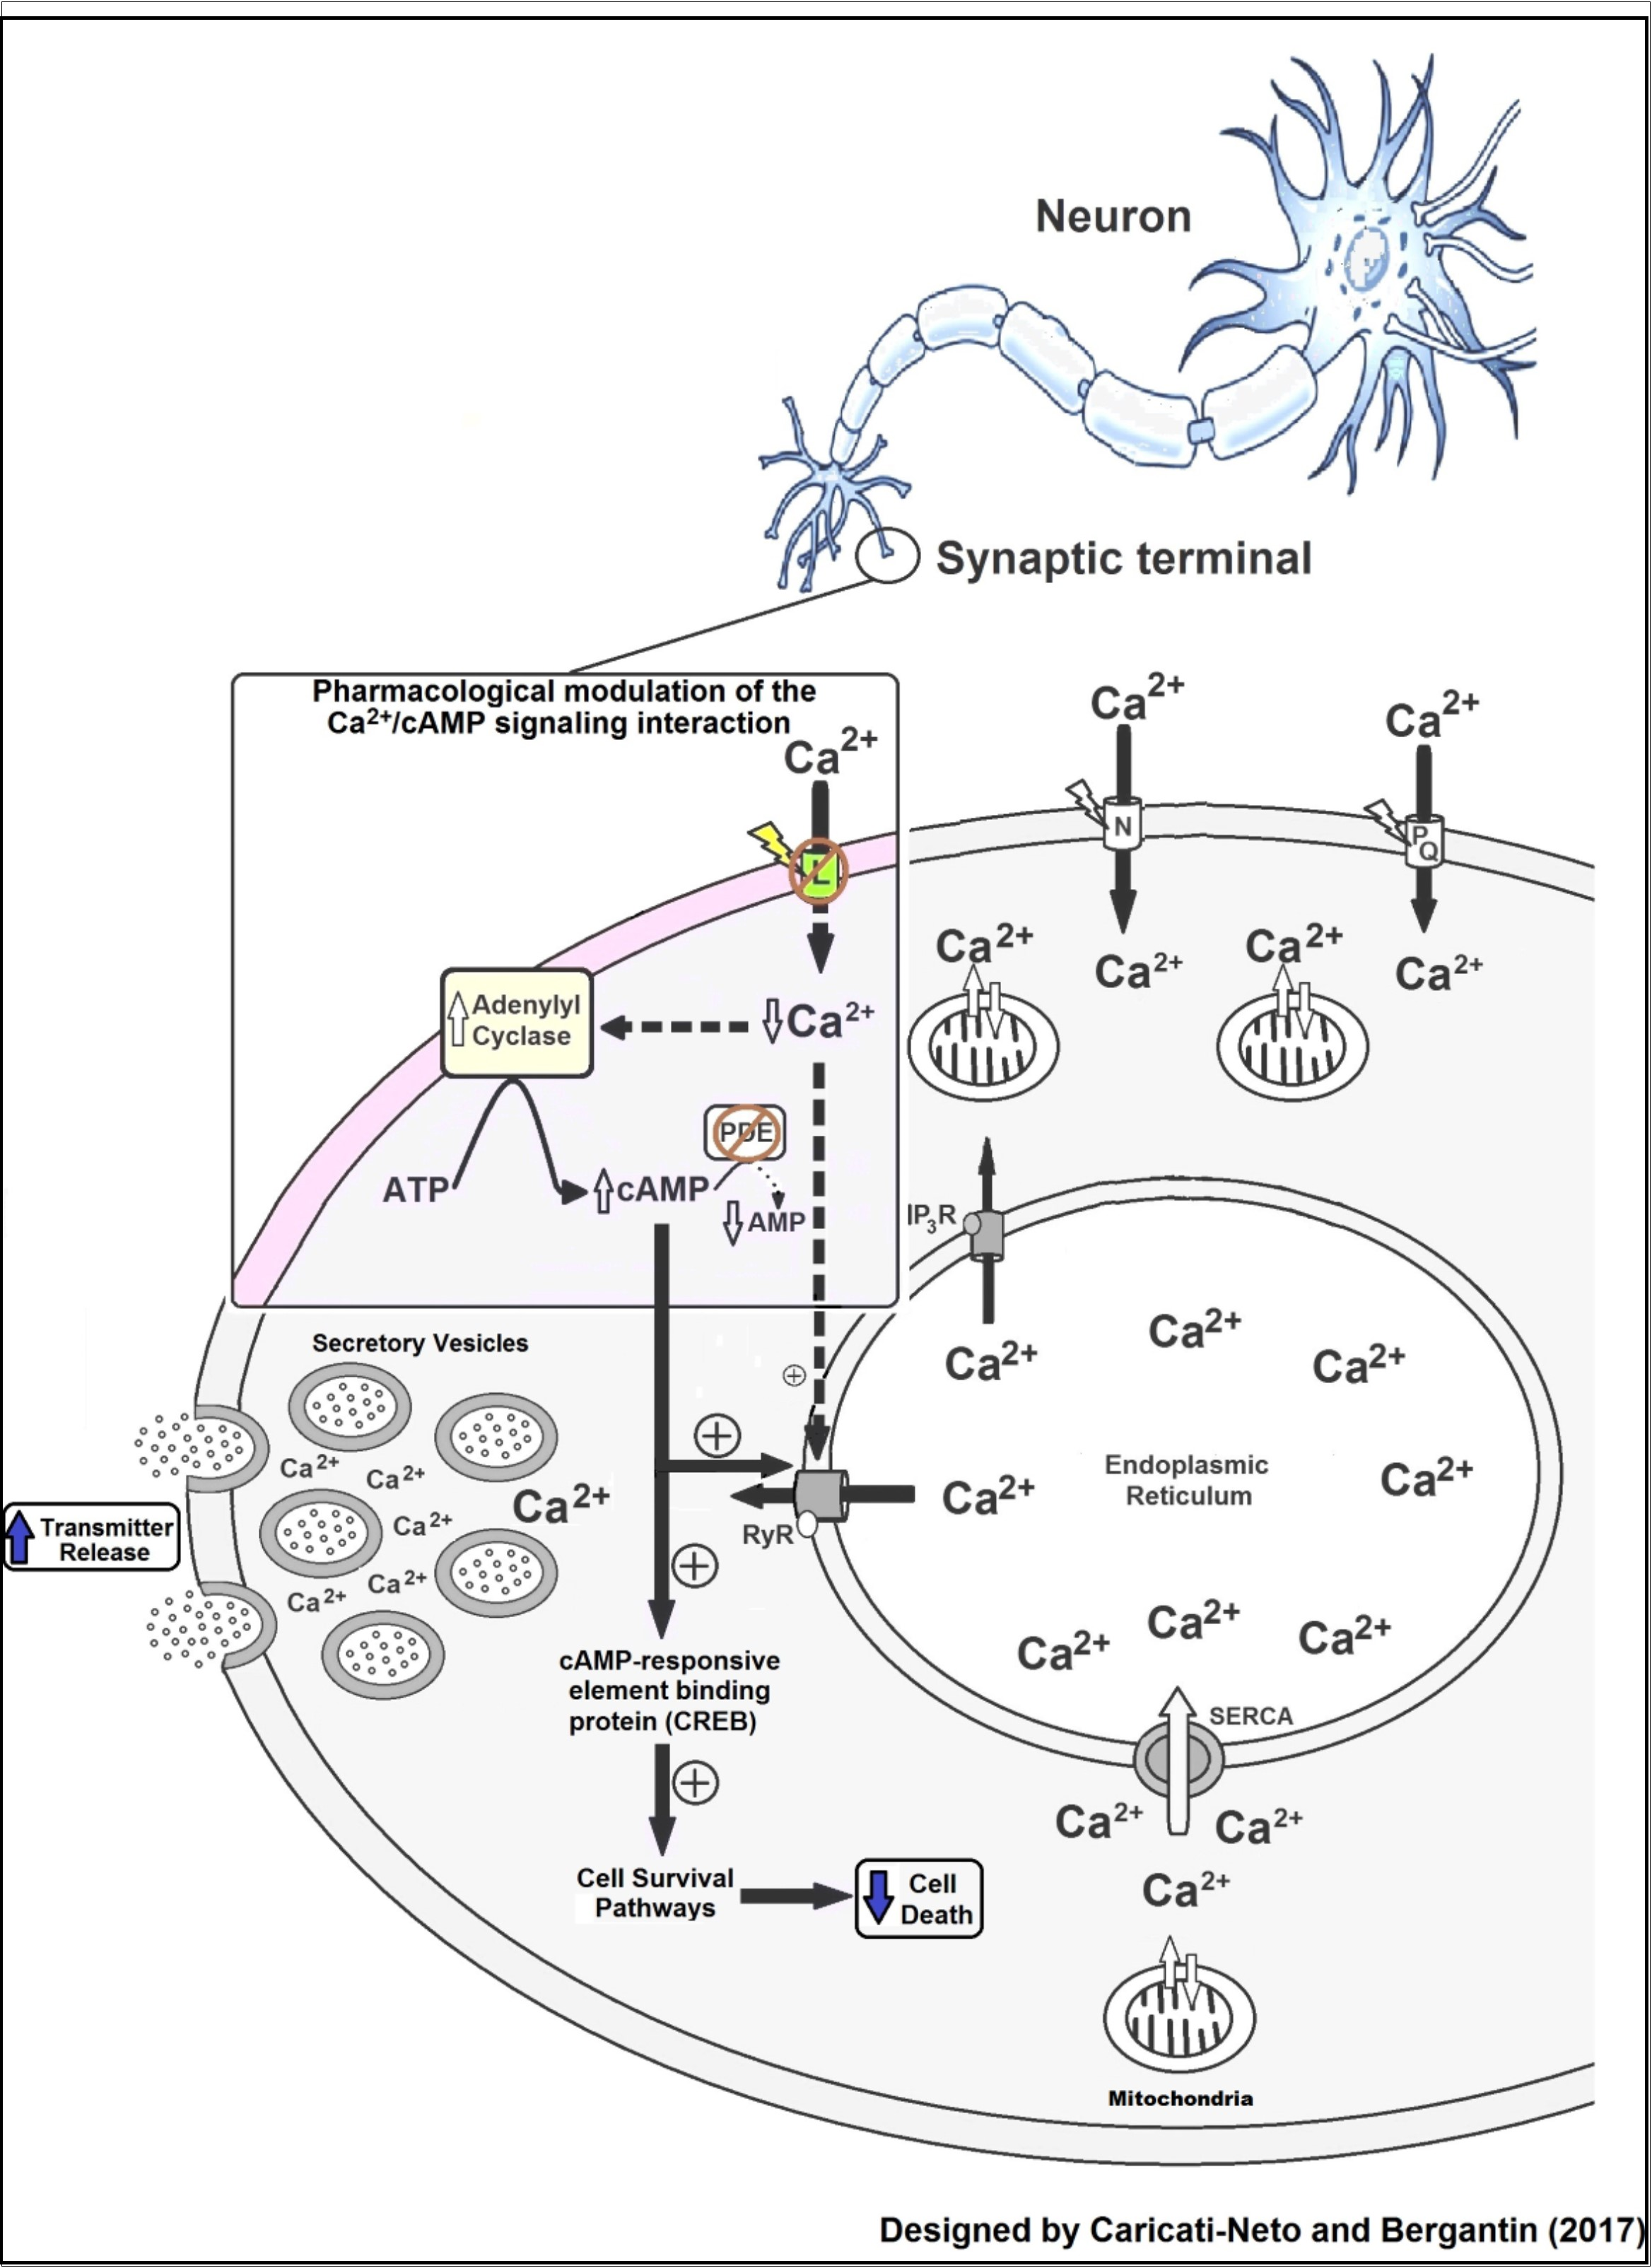  Pharmacological modulation of the Ca2+/cAMP signaling interaction proposed by Caricati-Neto and Bergantin 1516. The Ca2+/cAMP signaling interaction can be pharmacologically modulated by combined use of drugs that reduce Ca2+c such as CCB, and cAMP-enhancer compounds such as PDE inhibitors and AC activators. This pharmacological modulation could be a new strategy to attenuate neuronal death caused by cytosolic Ca2+ overload and to increase neurotransmitter release. L, N, PQ: Ca2+ channel types; PDE: phosphodiesterase; RyR: ryanodine receptors; IP3R: IP3 receptors; SERCA: sarcoendoplasmic reticulum Ca2+-ATPase; (+): stimulation; dotted arrow: weak effect; solid arrow: strong effect. 